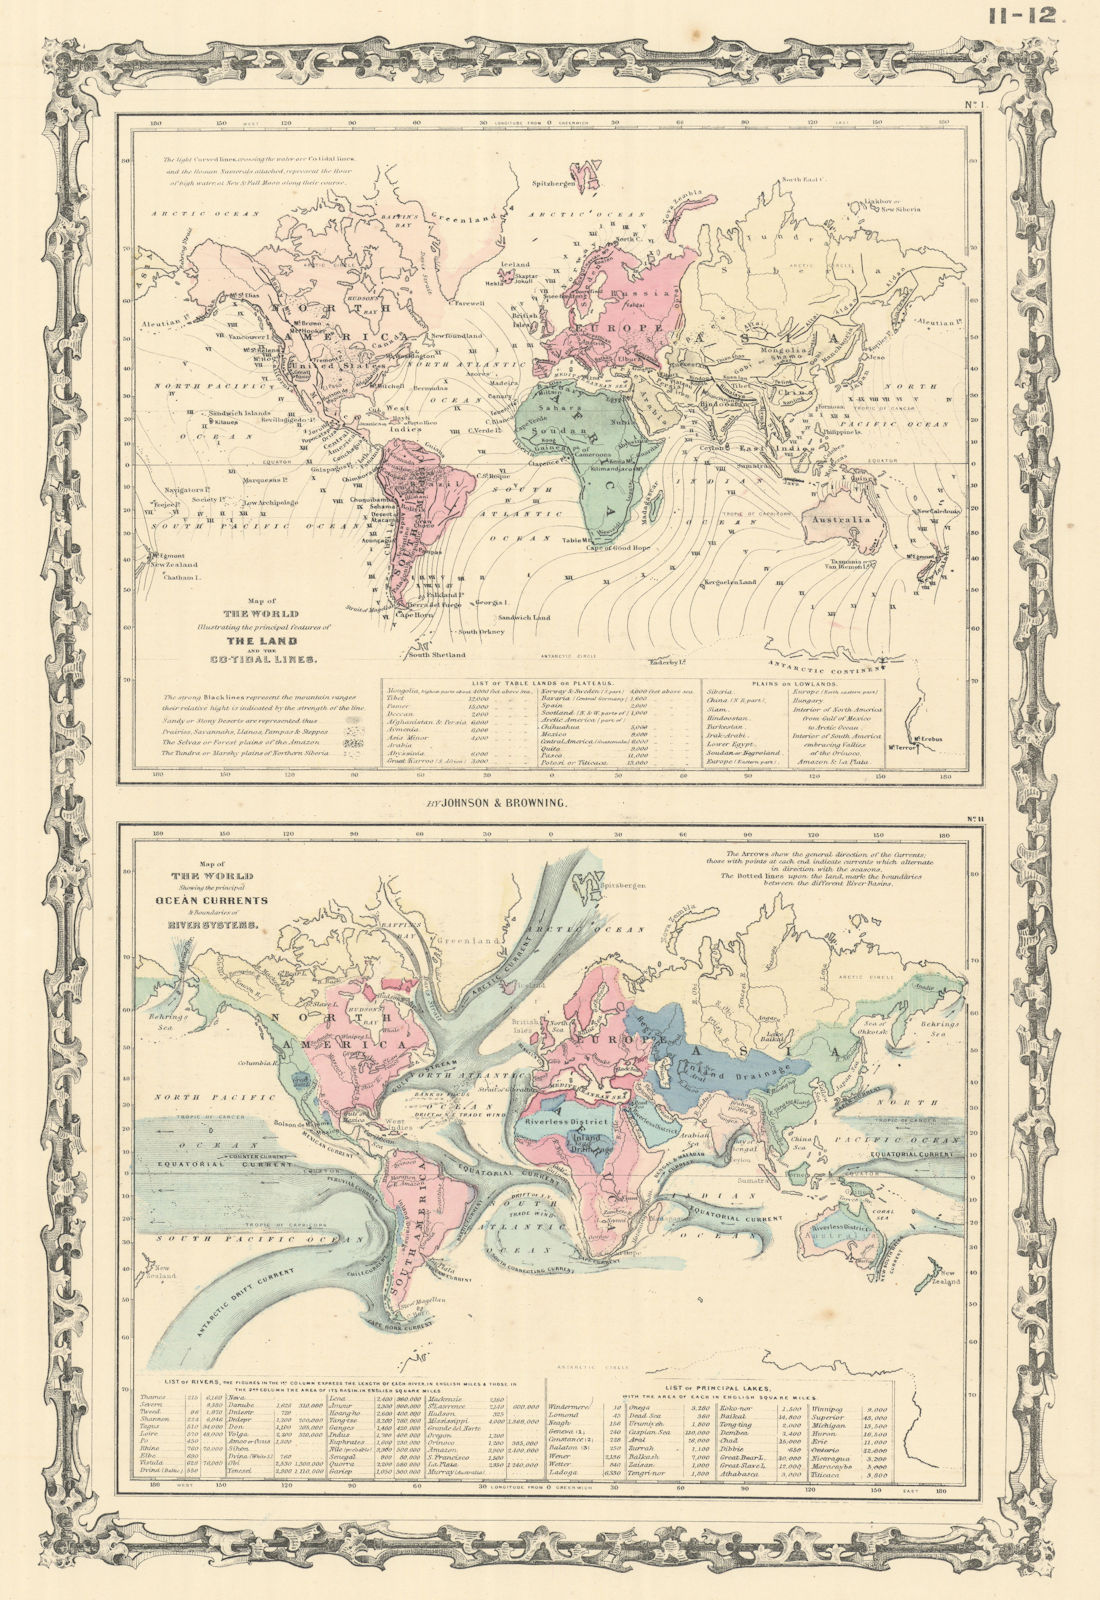 World Land features. Co-tidal Lines. Ocean currents. Watersheds JOHNSON 1861 map